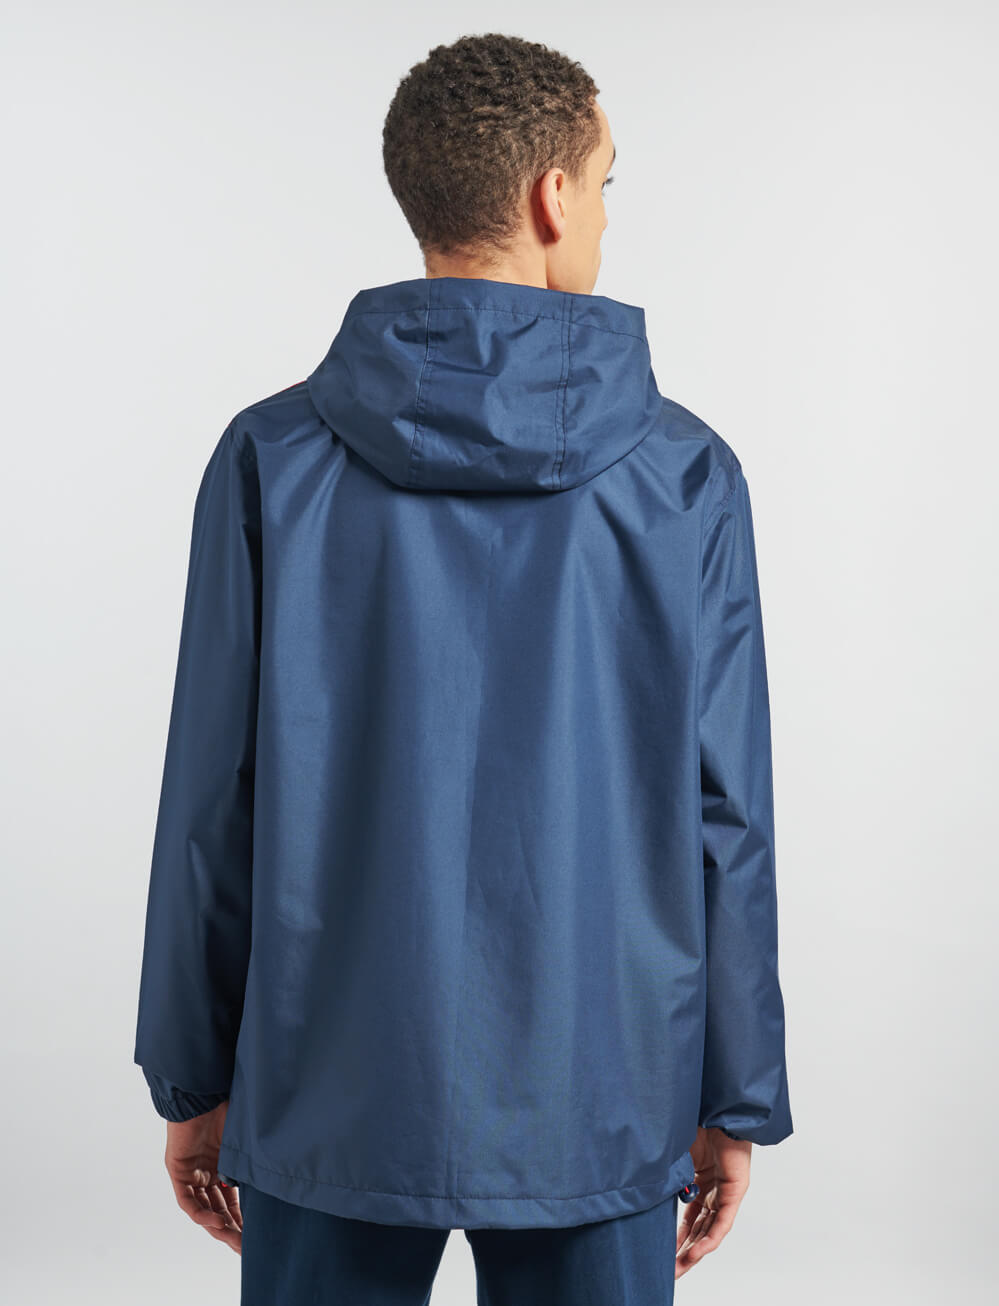 Official Arsenal Shower Jacket - Navy - The World Football Store